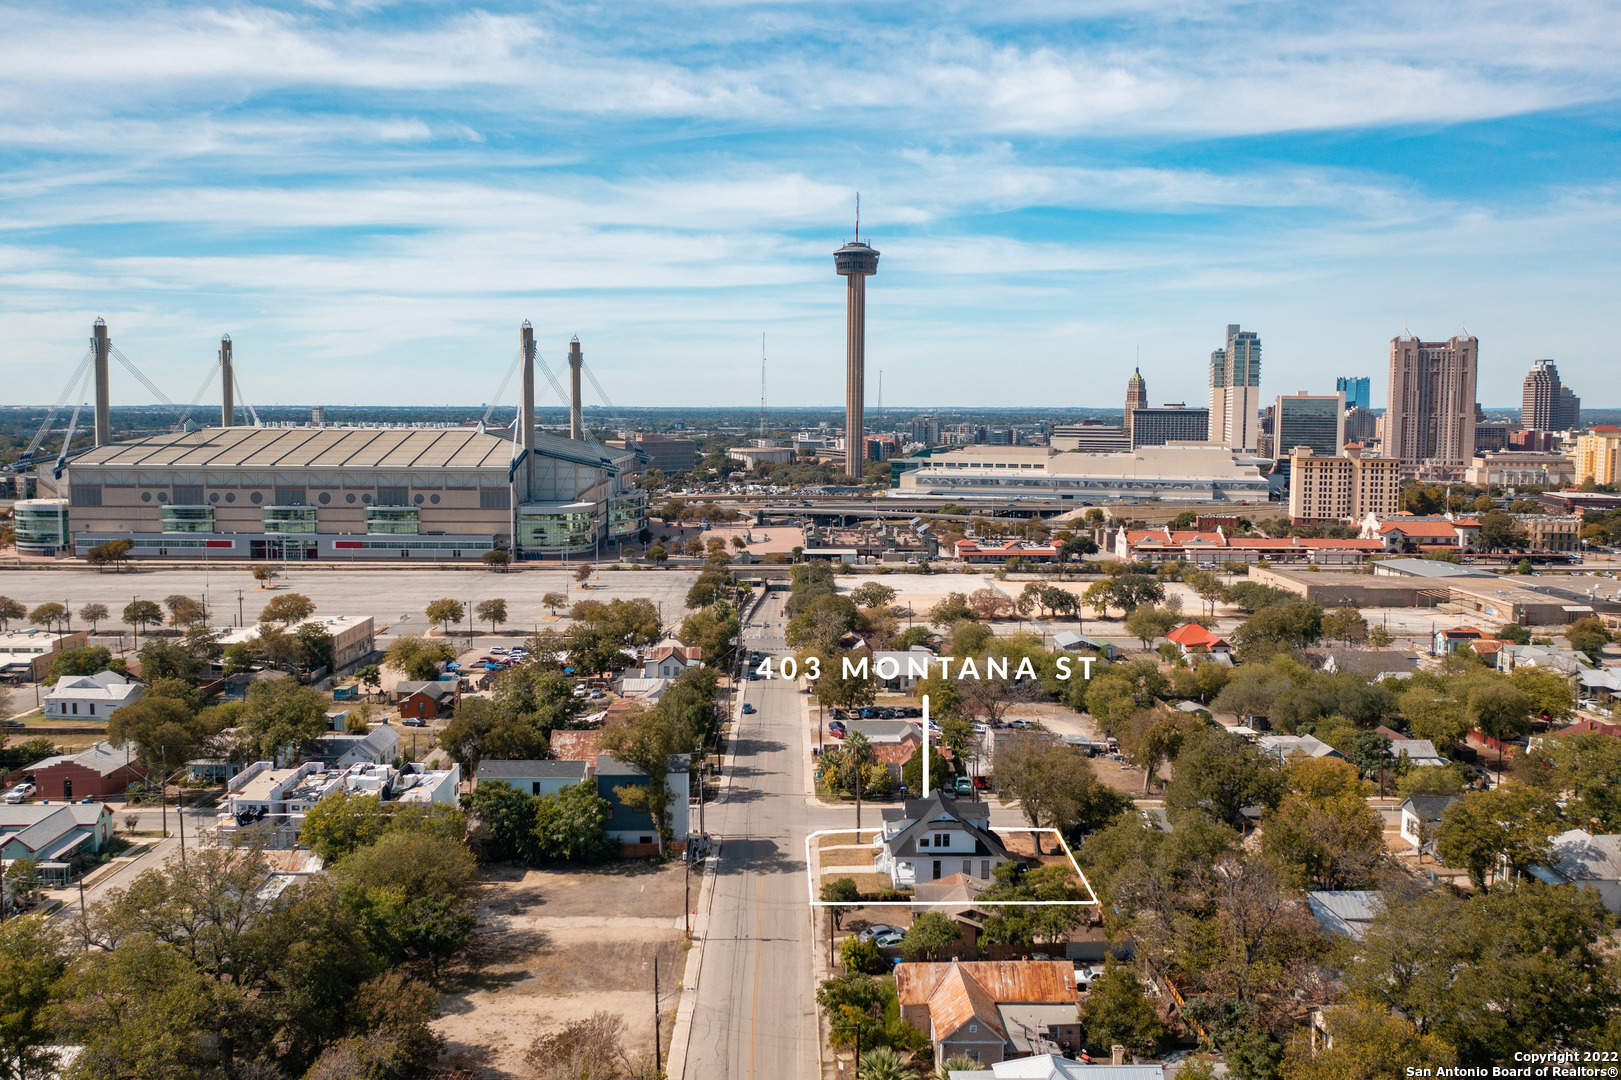 *OPEN HOUSE SATURDAY DEC 3RD, 12PM -2 PM* Welcome to 403 Montana, a stunning reconstructed Historic Landmark with a sleek modern interior and incomparable views of the Tower of the Americas! Designed by Frederick Bowen Gaenslen in 1897, This Queen Anne residence sits on a spacious corner lot in the desirable Alamodome Gardens neighborhood. Located walking distance to the Alamodome, Downtown San Antonio, The Riverwalk, and new developments arising on the Eastside. Offering 5 Bedrooms - Two Primary Suites, plus an office with a fireplace, an open concept kitchen and living area, an informal dining room, game room upstairs, and a balcony over the porch which offers some of the best views of Downtown San Antonio. You and your guests can watch New Years eve fireworks and 4th of July sparkles from your front yard! Although the historic features have been beautifully preserved, the home has been meticulously rebuilt with new electrical, new foundation, new HVAC, new roof, new sheetrock, new paint, new flooring, new amazing bathrooms, and a lovely new kitchen with new countertops, appliances, and new cabinetry. This famous residence has been designated a historic landmark for being one of Gaenslen's early architectural achievements. Gaenslen also designed other notable buildings like the Chapel of the Incarnate Word, Our Lady of the Lake Convent, St. Anthony School and more. Sitting on a spacious .17 acre corner lot and offering AE-2 Zoning which promotes the creation of Arts & Entertainment venues and supporting uses.